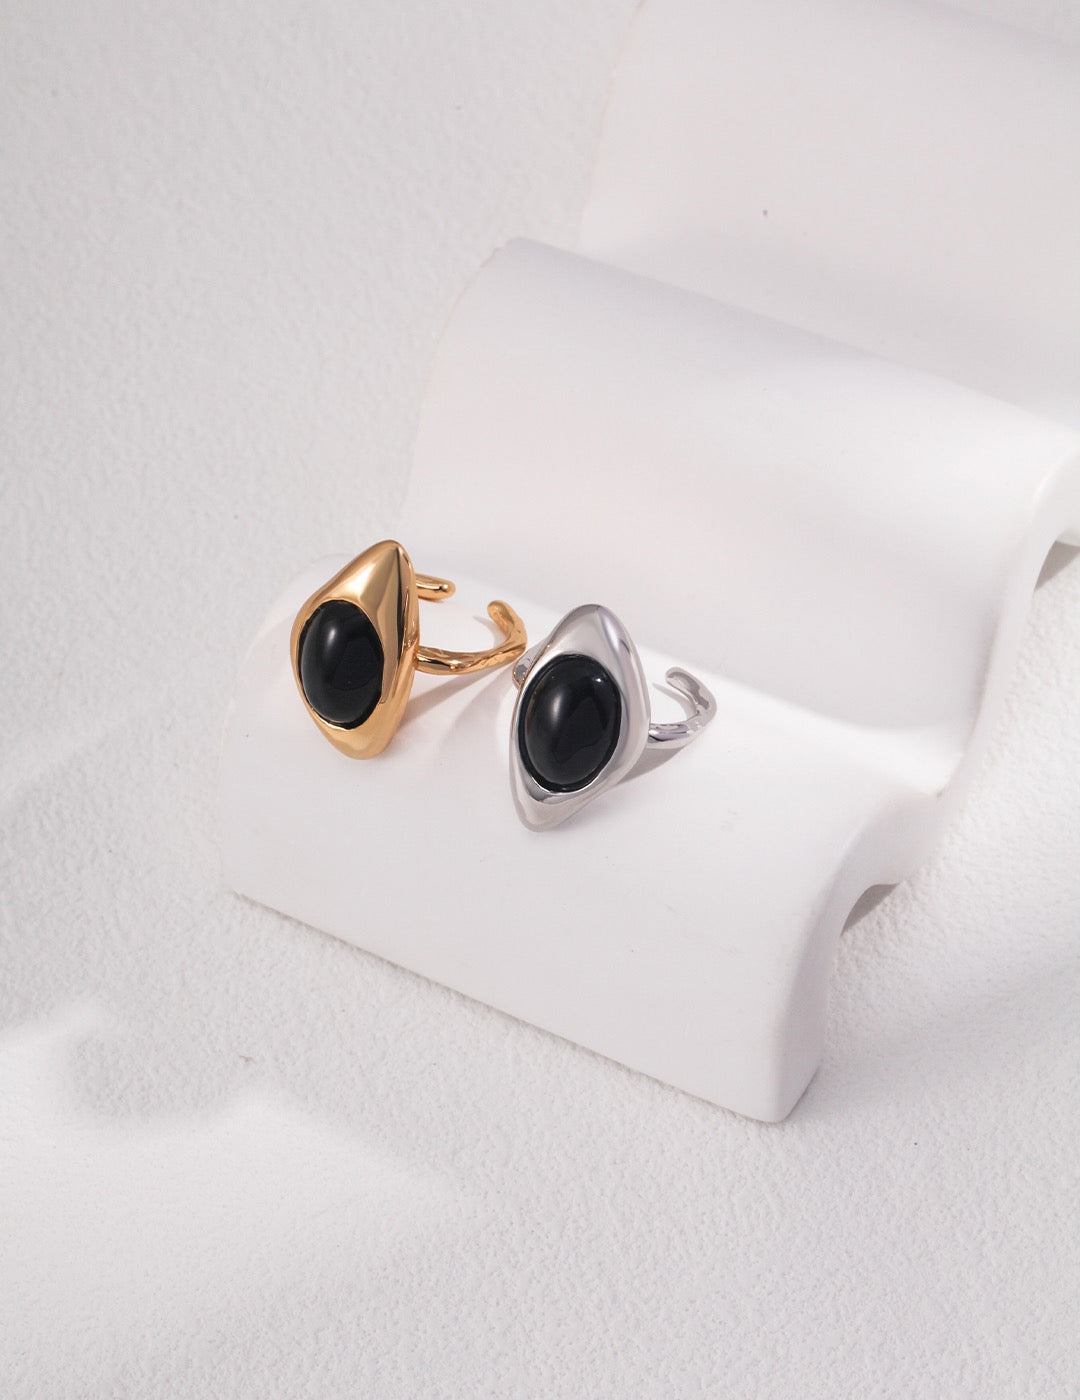 Black Agate Gemstone and Gold Ring -  S925 Sterling Silver with 18K Gold Vermeil  - a symbol of resilience and inner strength